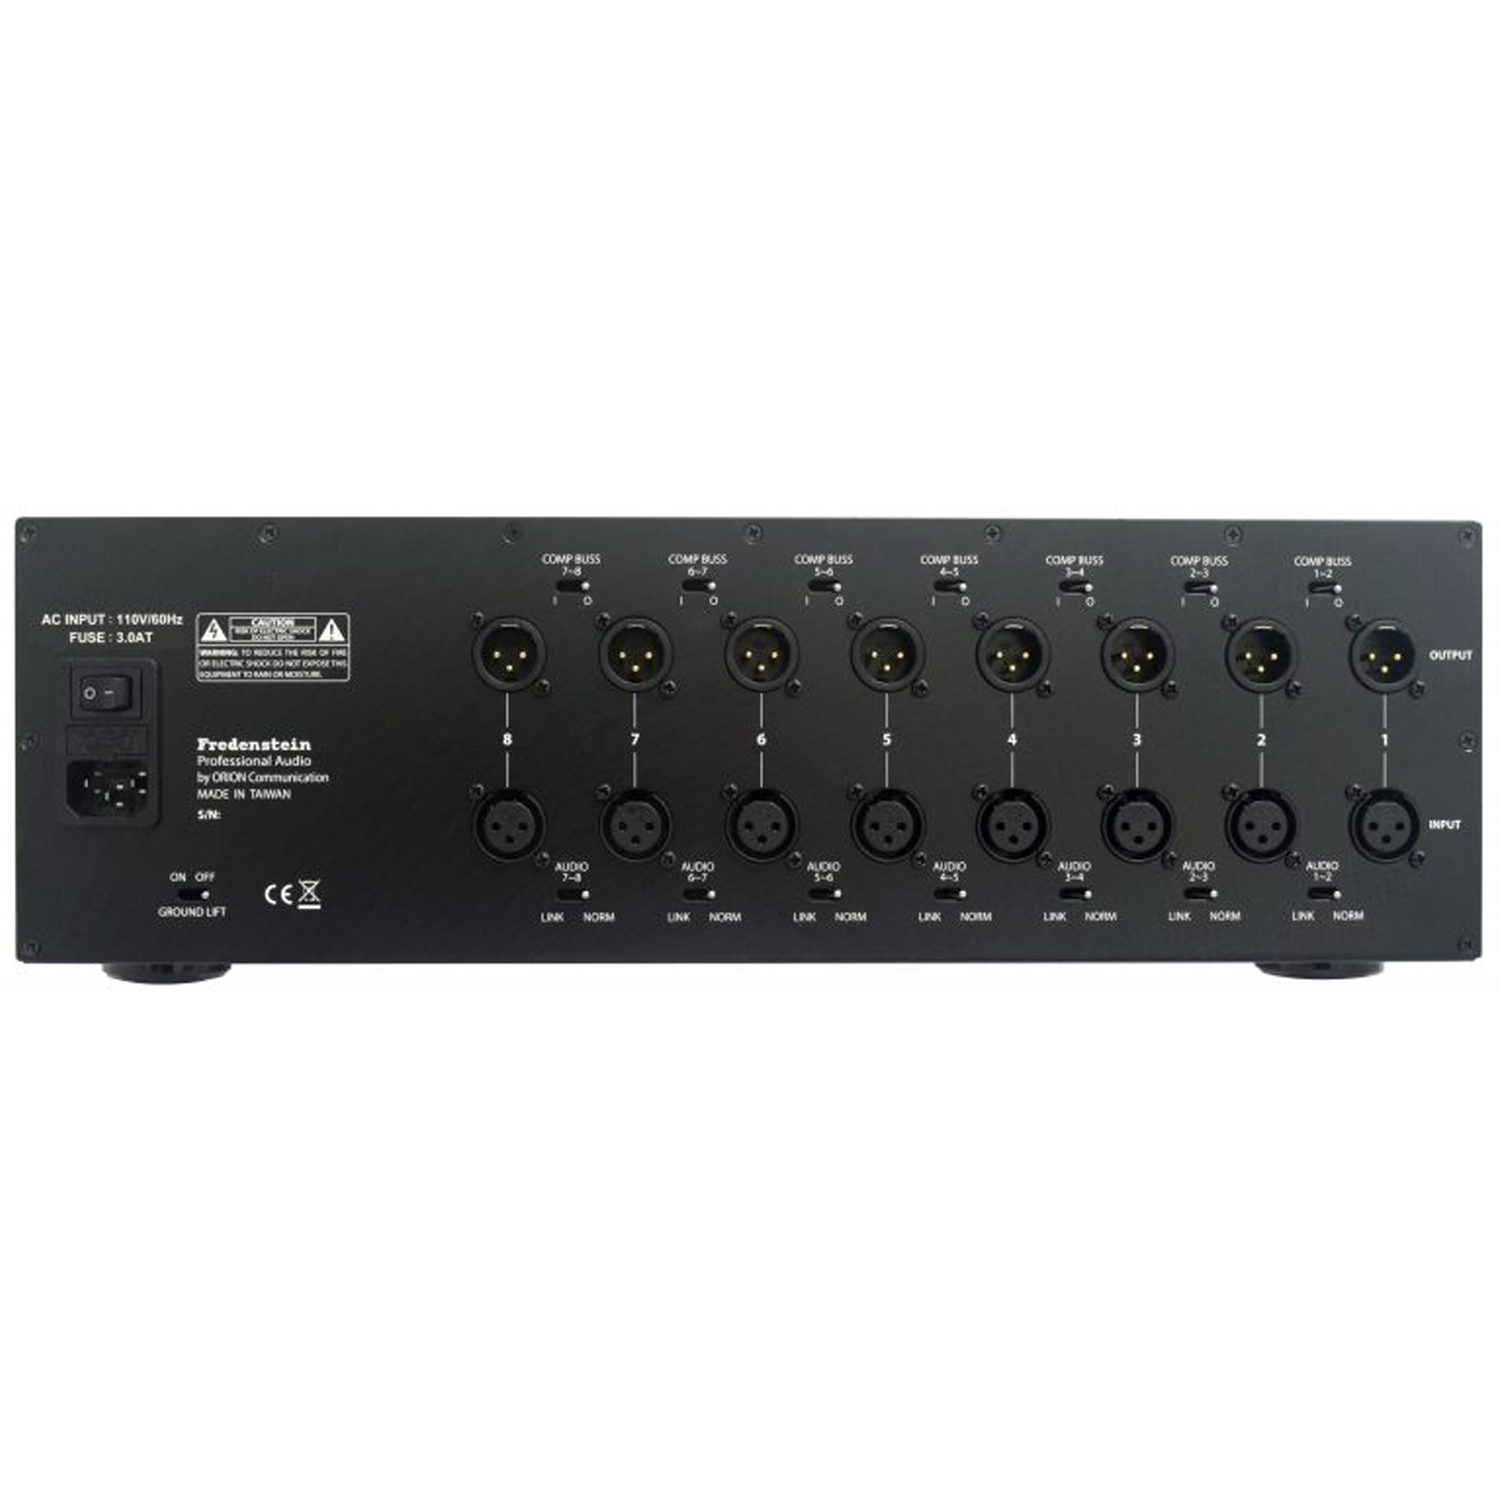 Fredenstein Bento 8, High-Power, Low-Noise 8-slot 500 Series Chassis